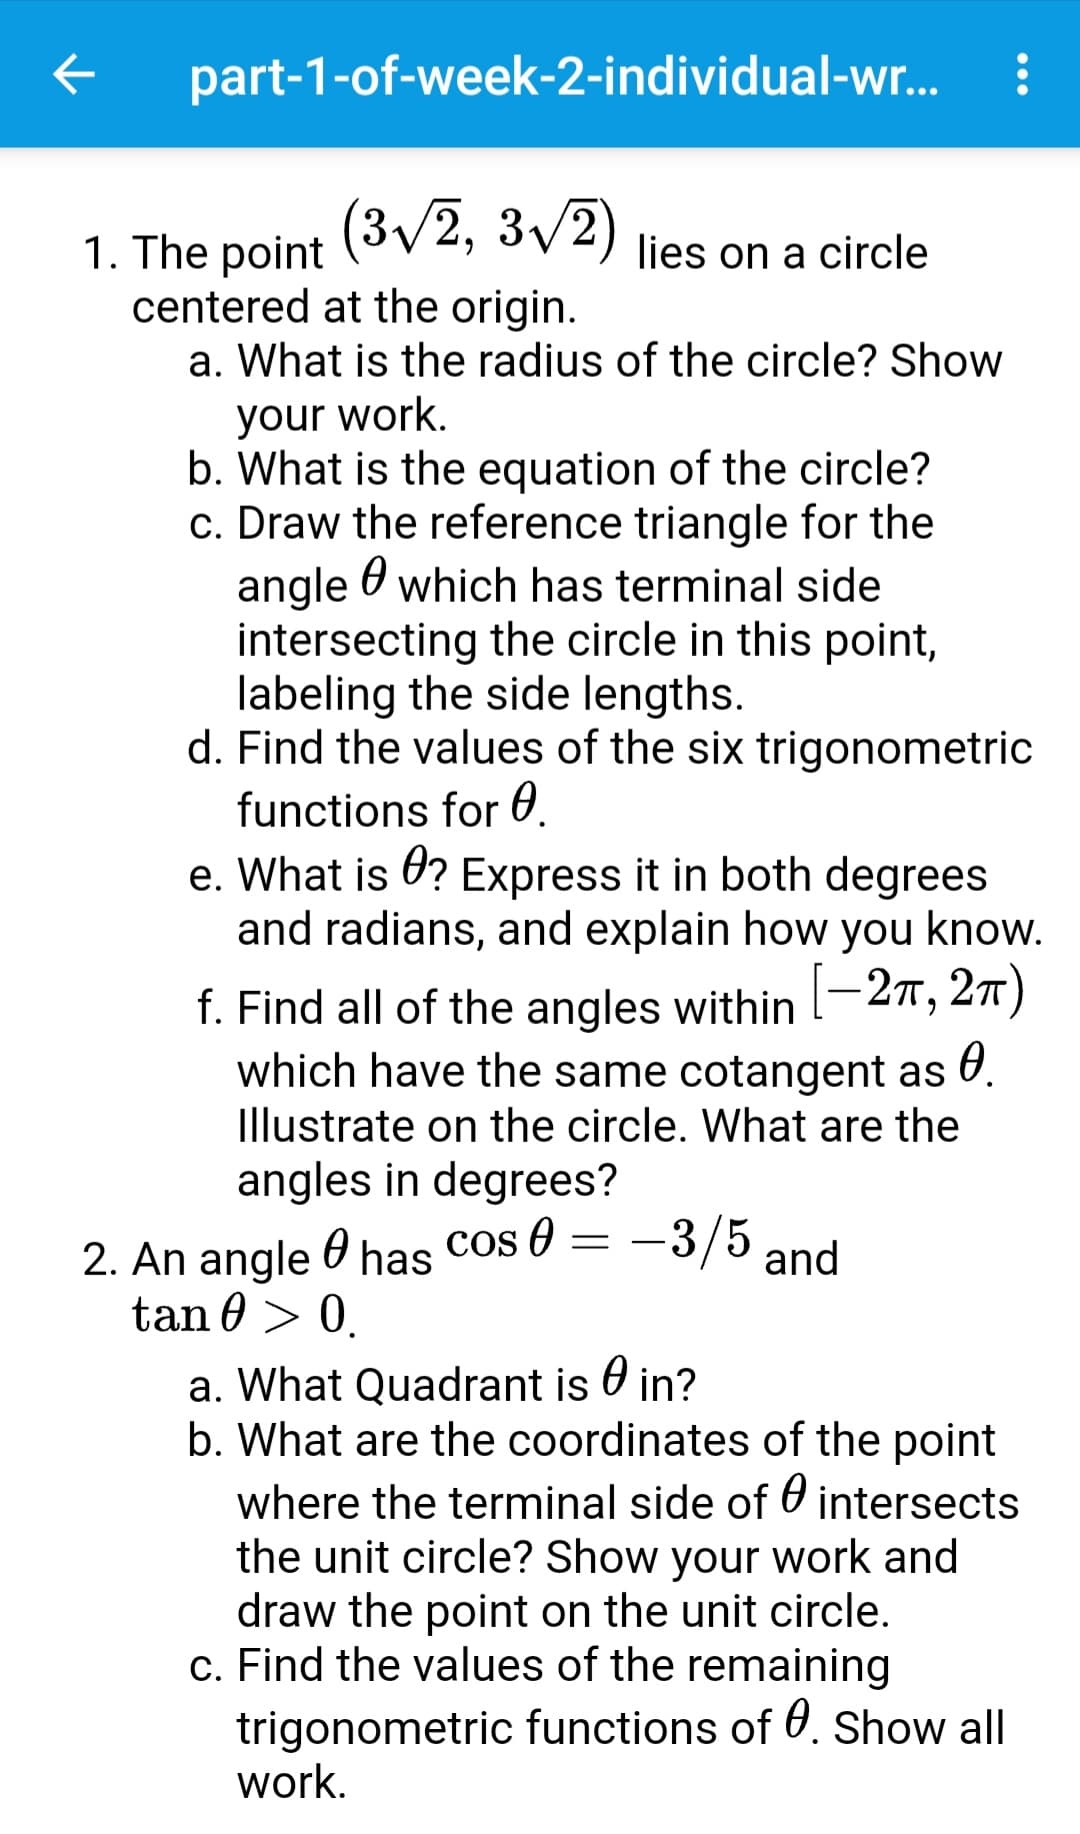 part-1-of-week-2-individual-wr...
(3v2, 3v2
1. The point
centered at the origin.
a. What is the radius of the circle? Show
lies on a circle
your work.
b. What is the equation of the circle?
c. Draw the reference triangle for the
angle O which has terminal side
intersecting the circle in this point,
labeling the side lengths.
d. Find the values of the six trigonometric
functions for 0.
e. What is 0? Express it in both degrees
and radians, and explain how you know.
f. Find all of the angles within l-27, 2)
which have the same cotangent as U.
|
Illustrate on the circle. What are the
angles in degrees?
-3/5 and
2. An angle 0 has cos 0 =
tan 0 > 0.
a. What Quadrant is O in?
b. What are the coordinates of the point
where the terminal side of 0 intersects
the unit circle? Show your work and
draw the point on the unit circle.
c. Find the values of the remaining
trigonometric functions of . Show all
work.
